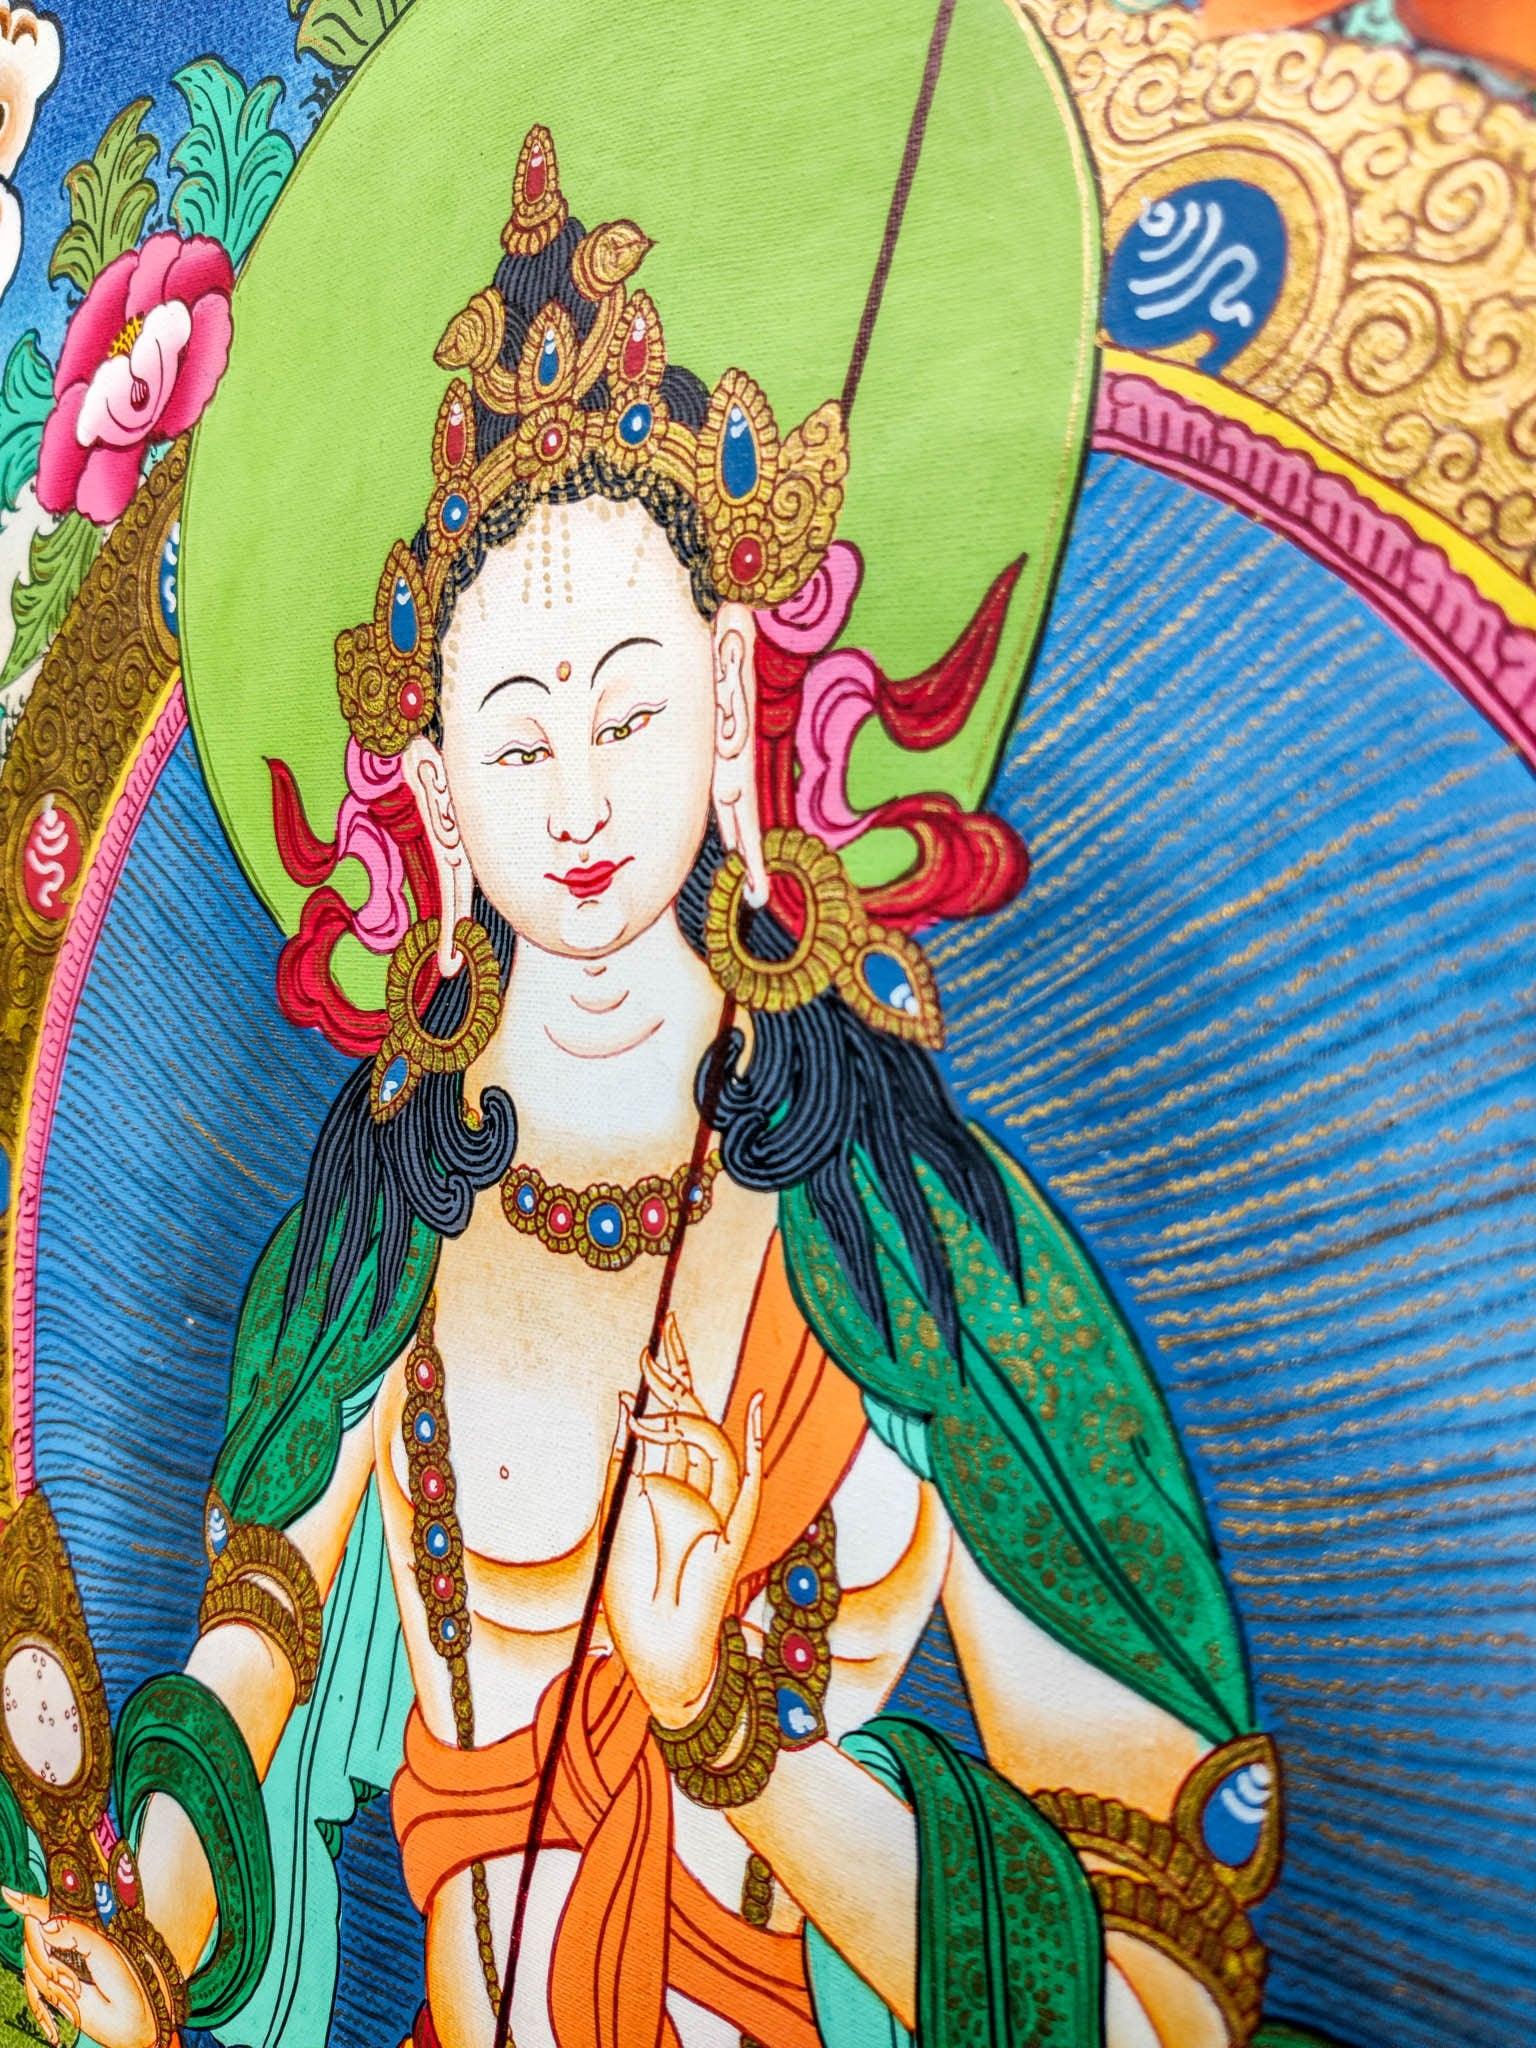 Sitatapatra is brilliant white, radiating with love and compassion and her body is adorned with various ornaments. This beautiful thangka art has portraited the Sitapatra very well.